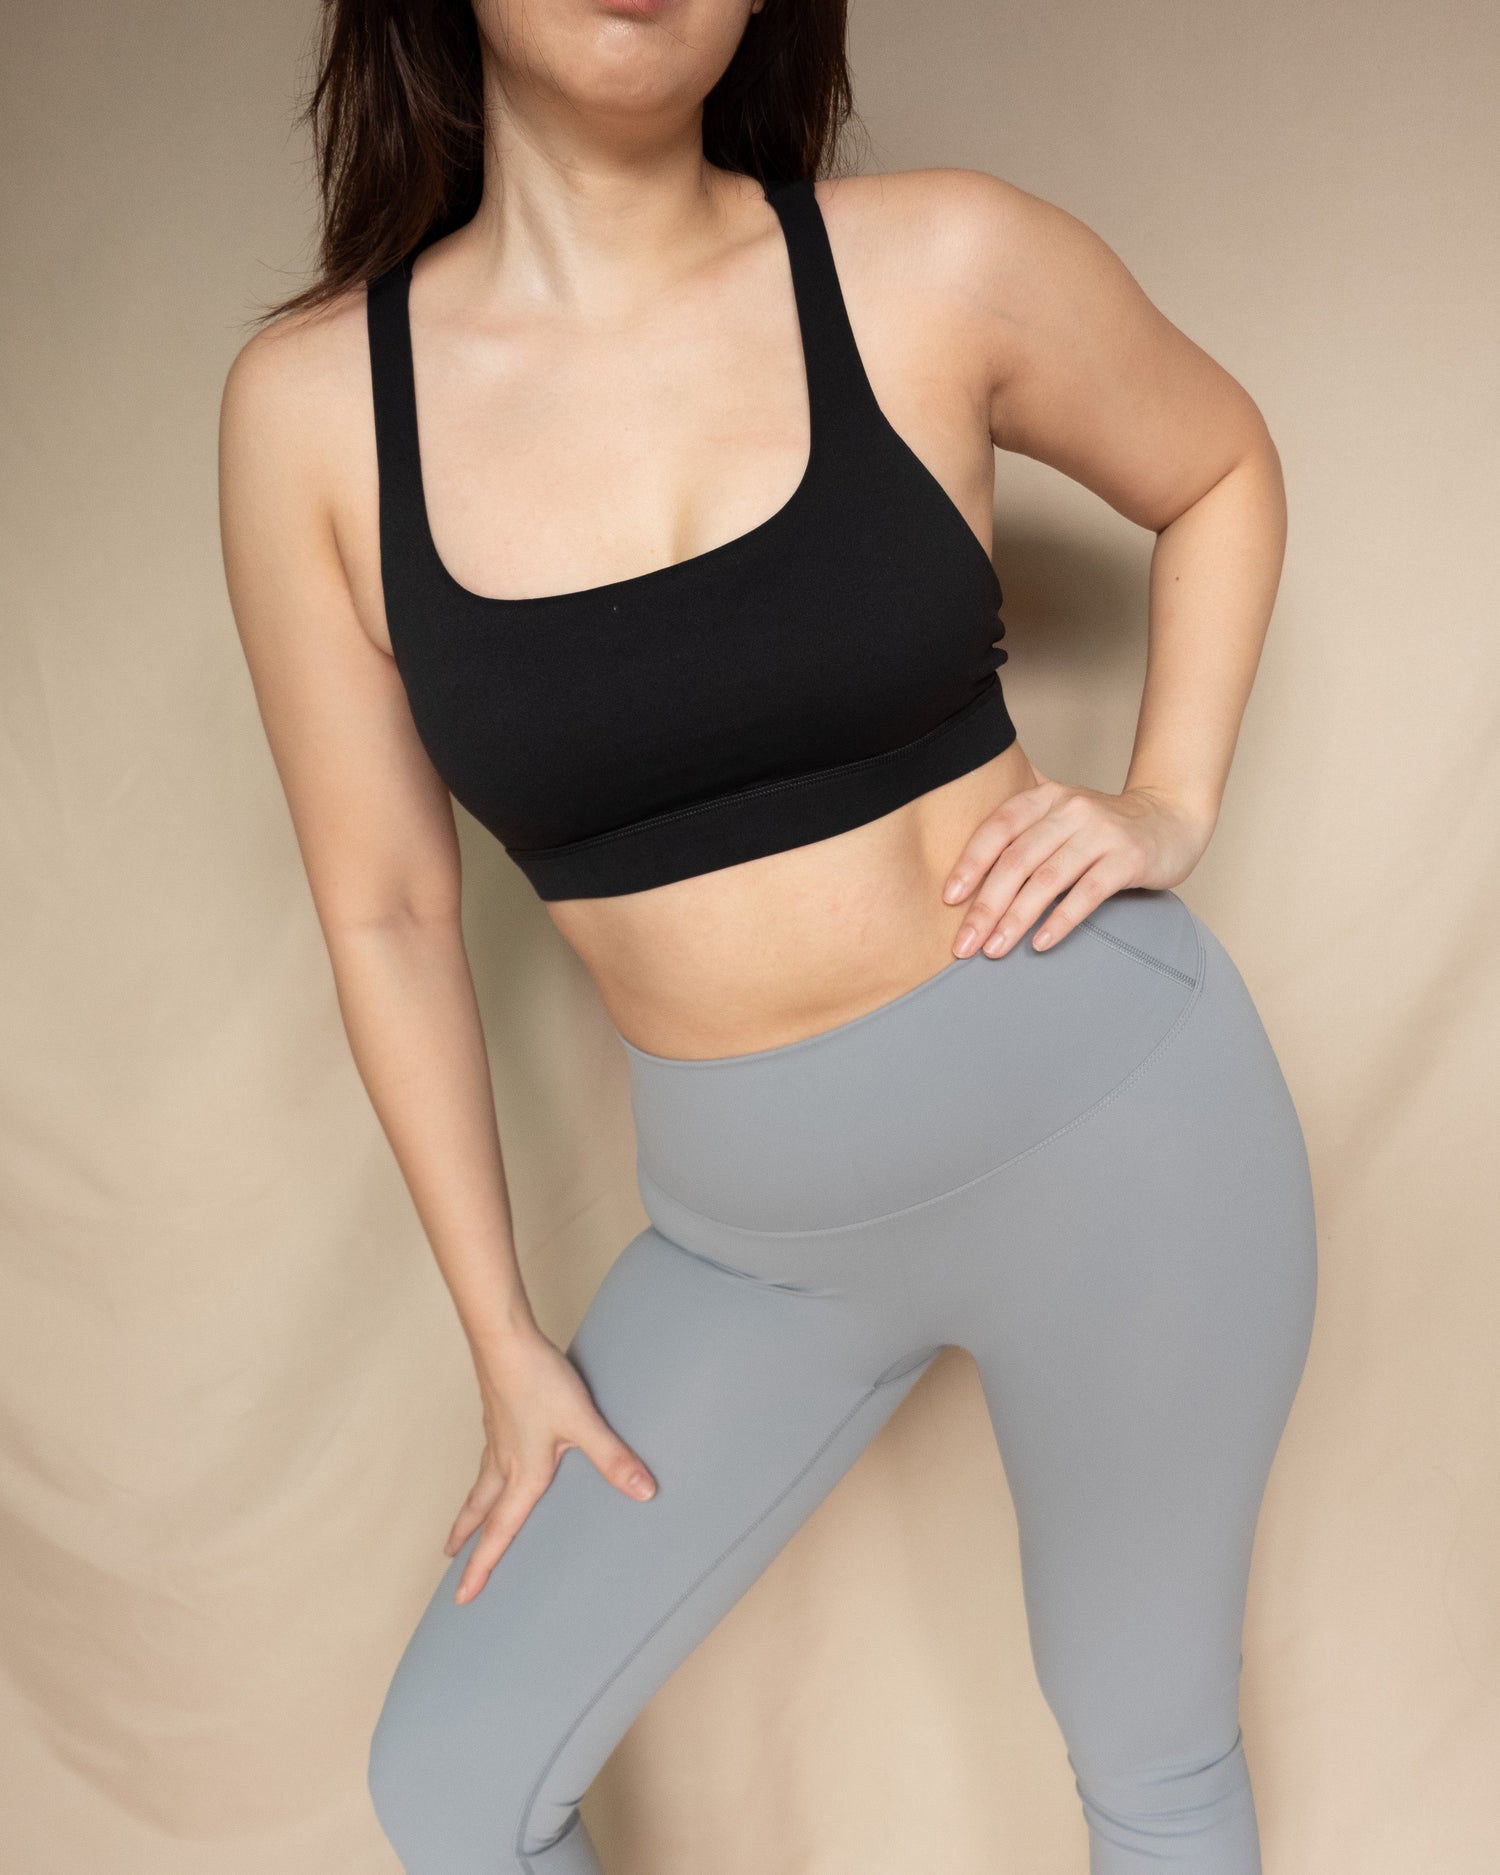 Easy bra 2.0 in Black - New Day Activewear